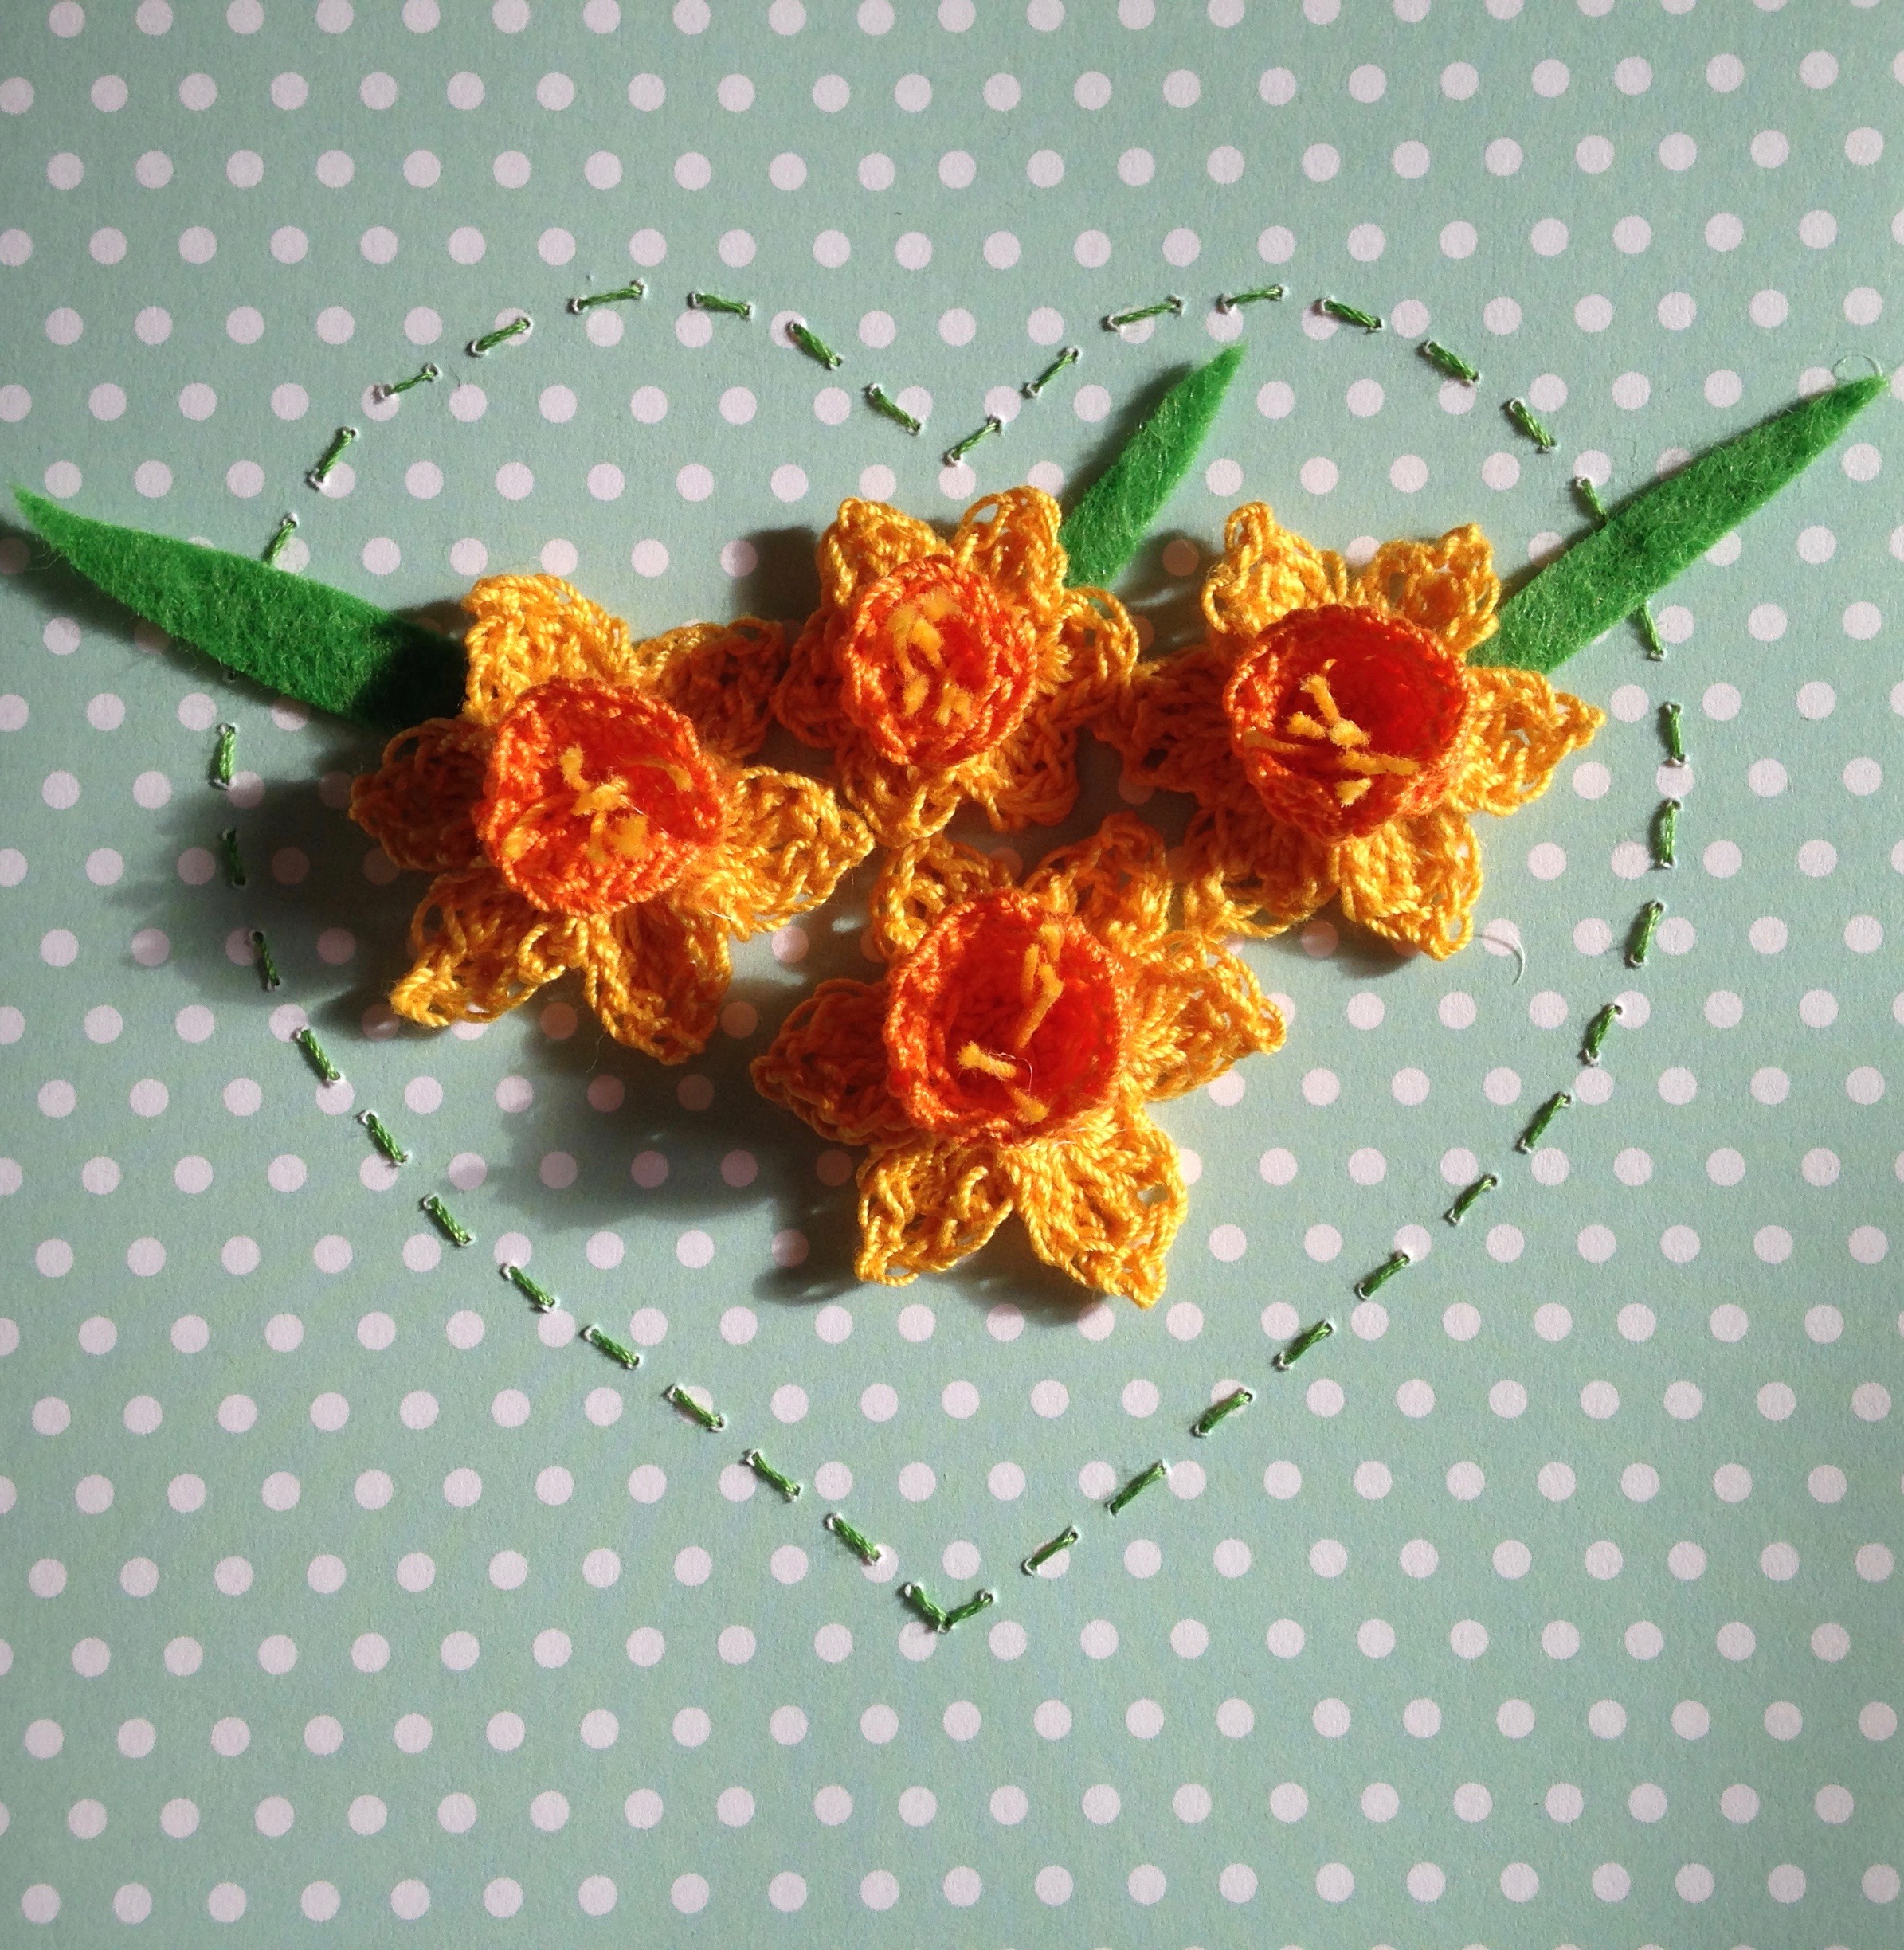 A crocheted Daffodil card. Crocheted Daffodils in yellow and orange surrounded by a hand stitched heart. With a green and white polka dot card background.